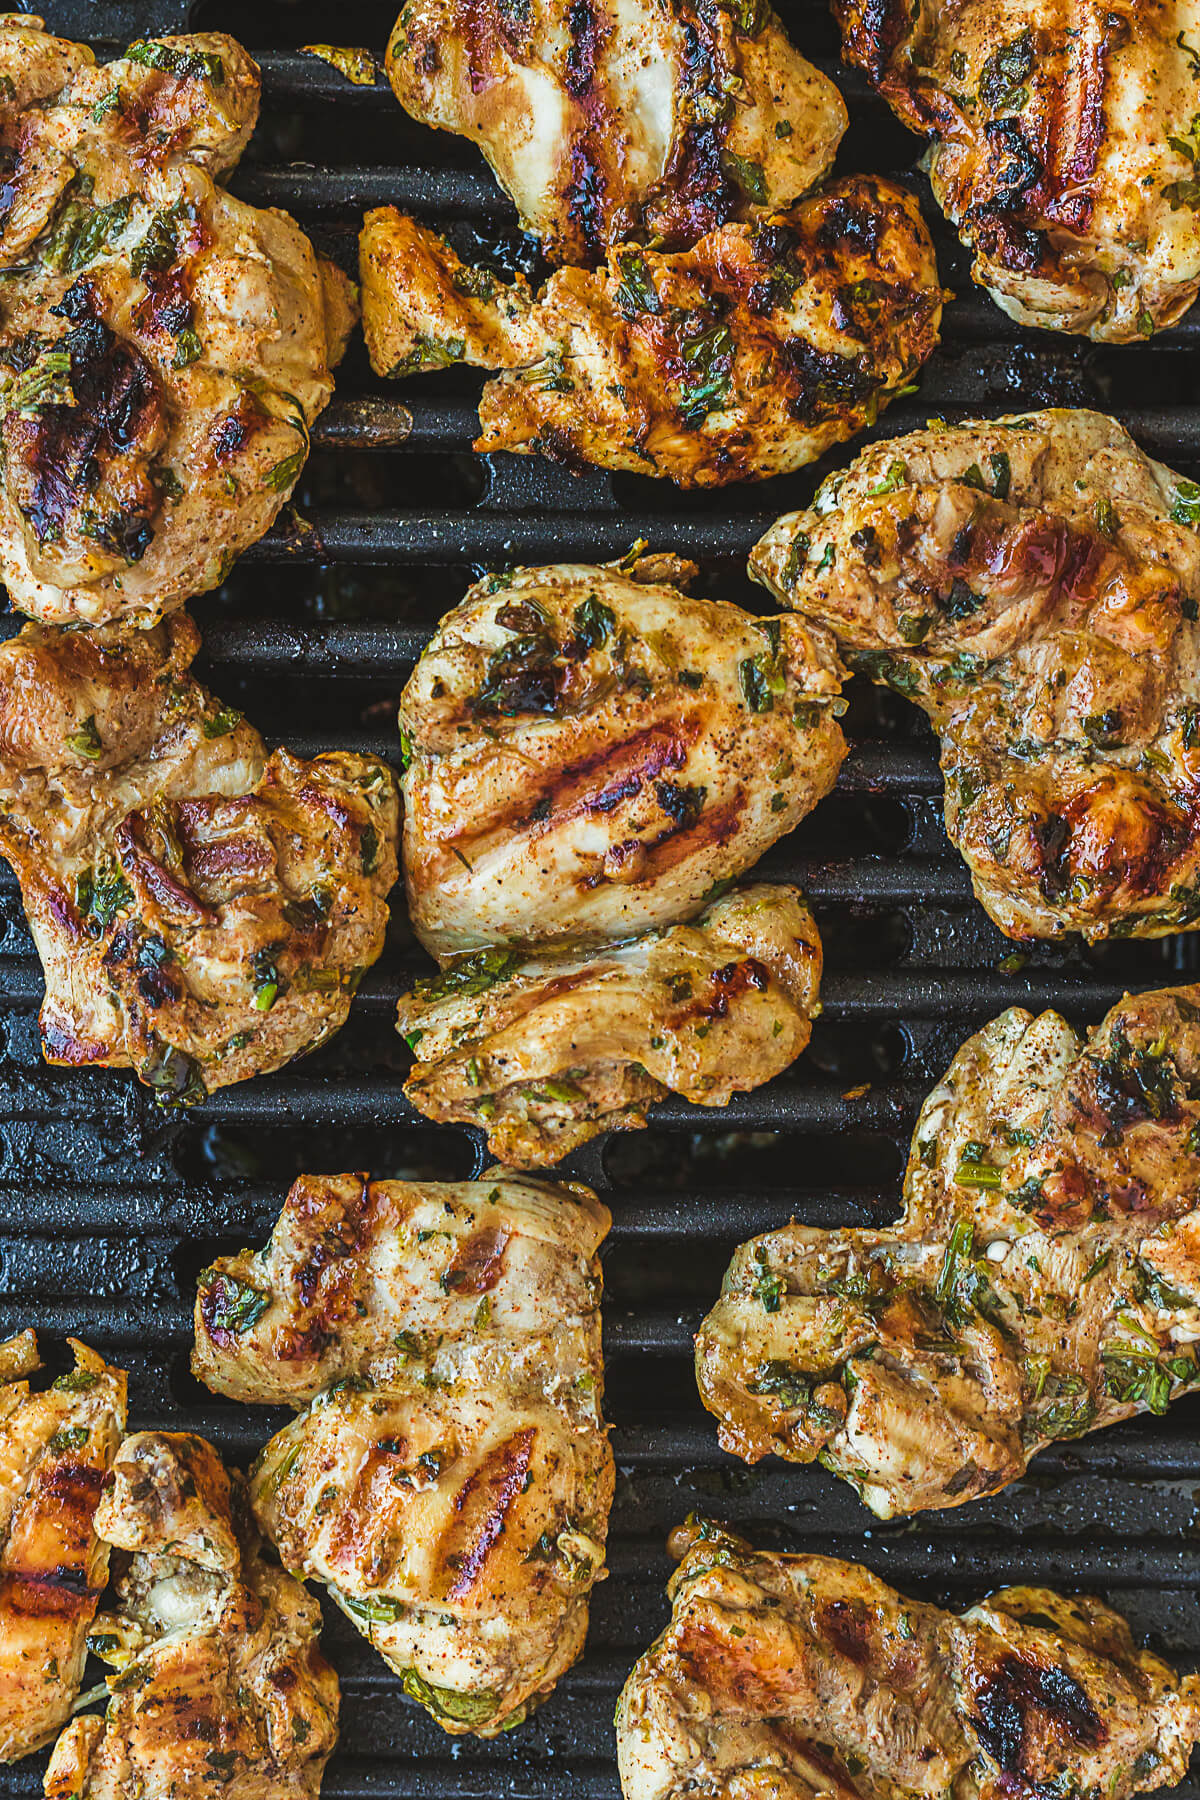 Chicken thighs being grilled on a barbecue.